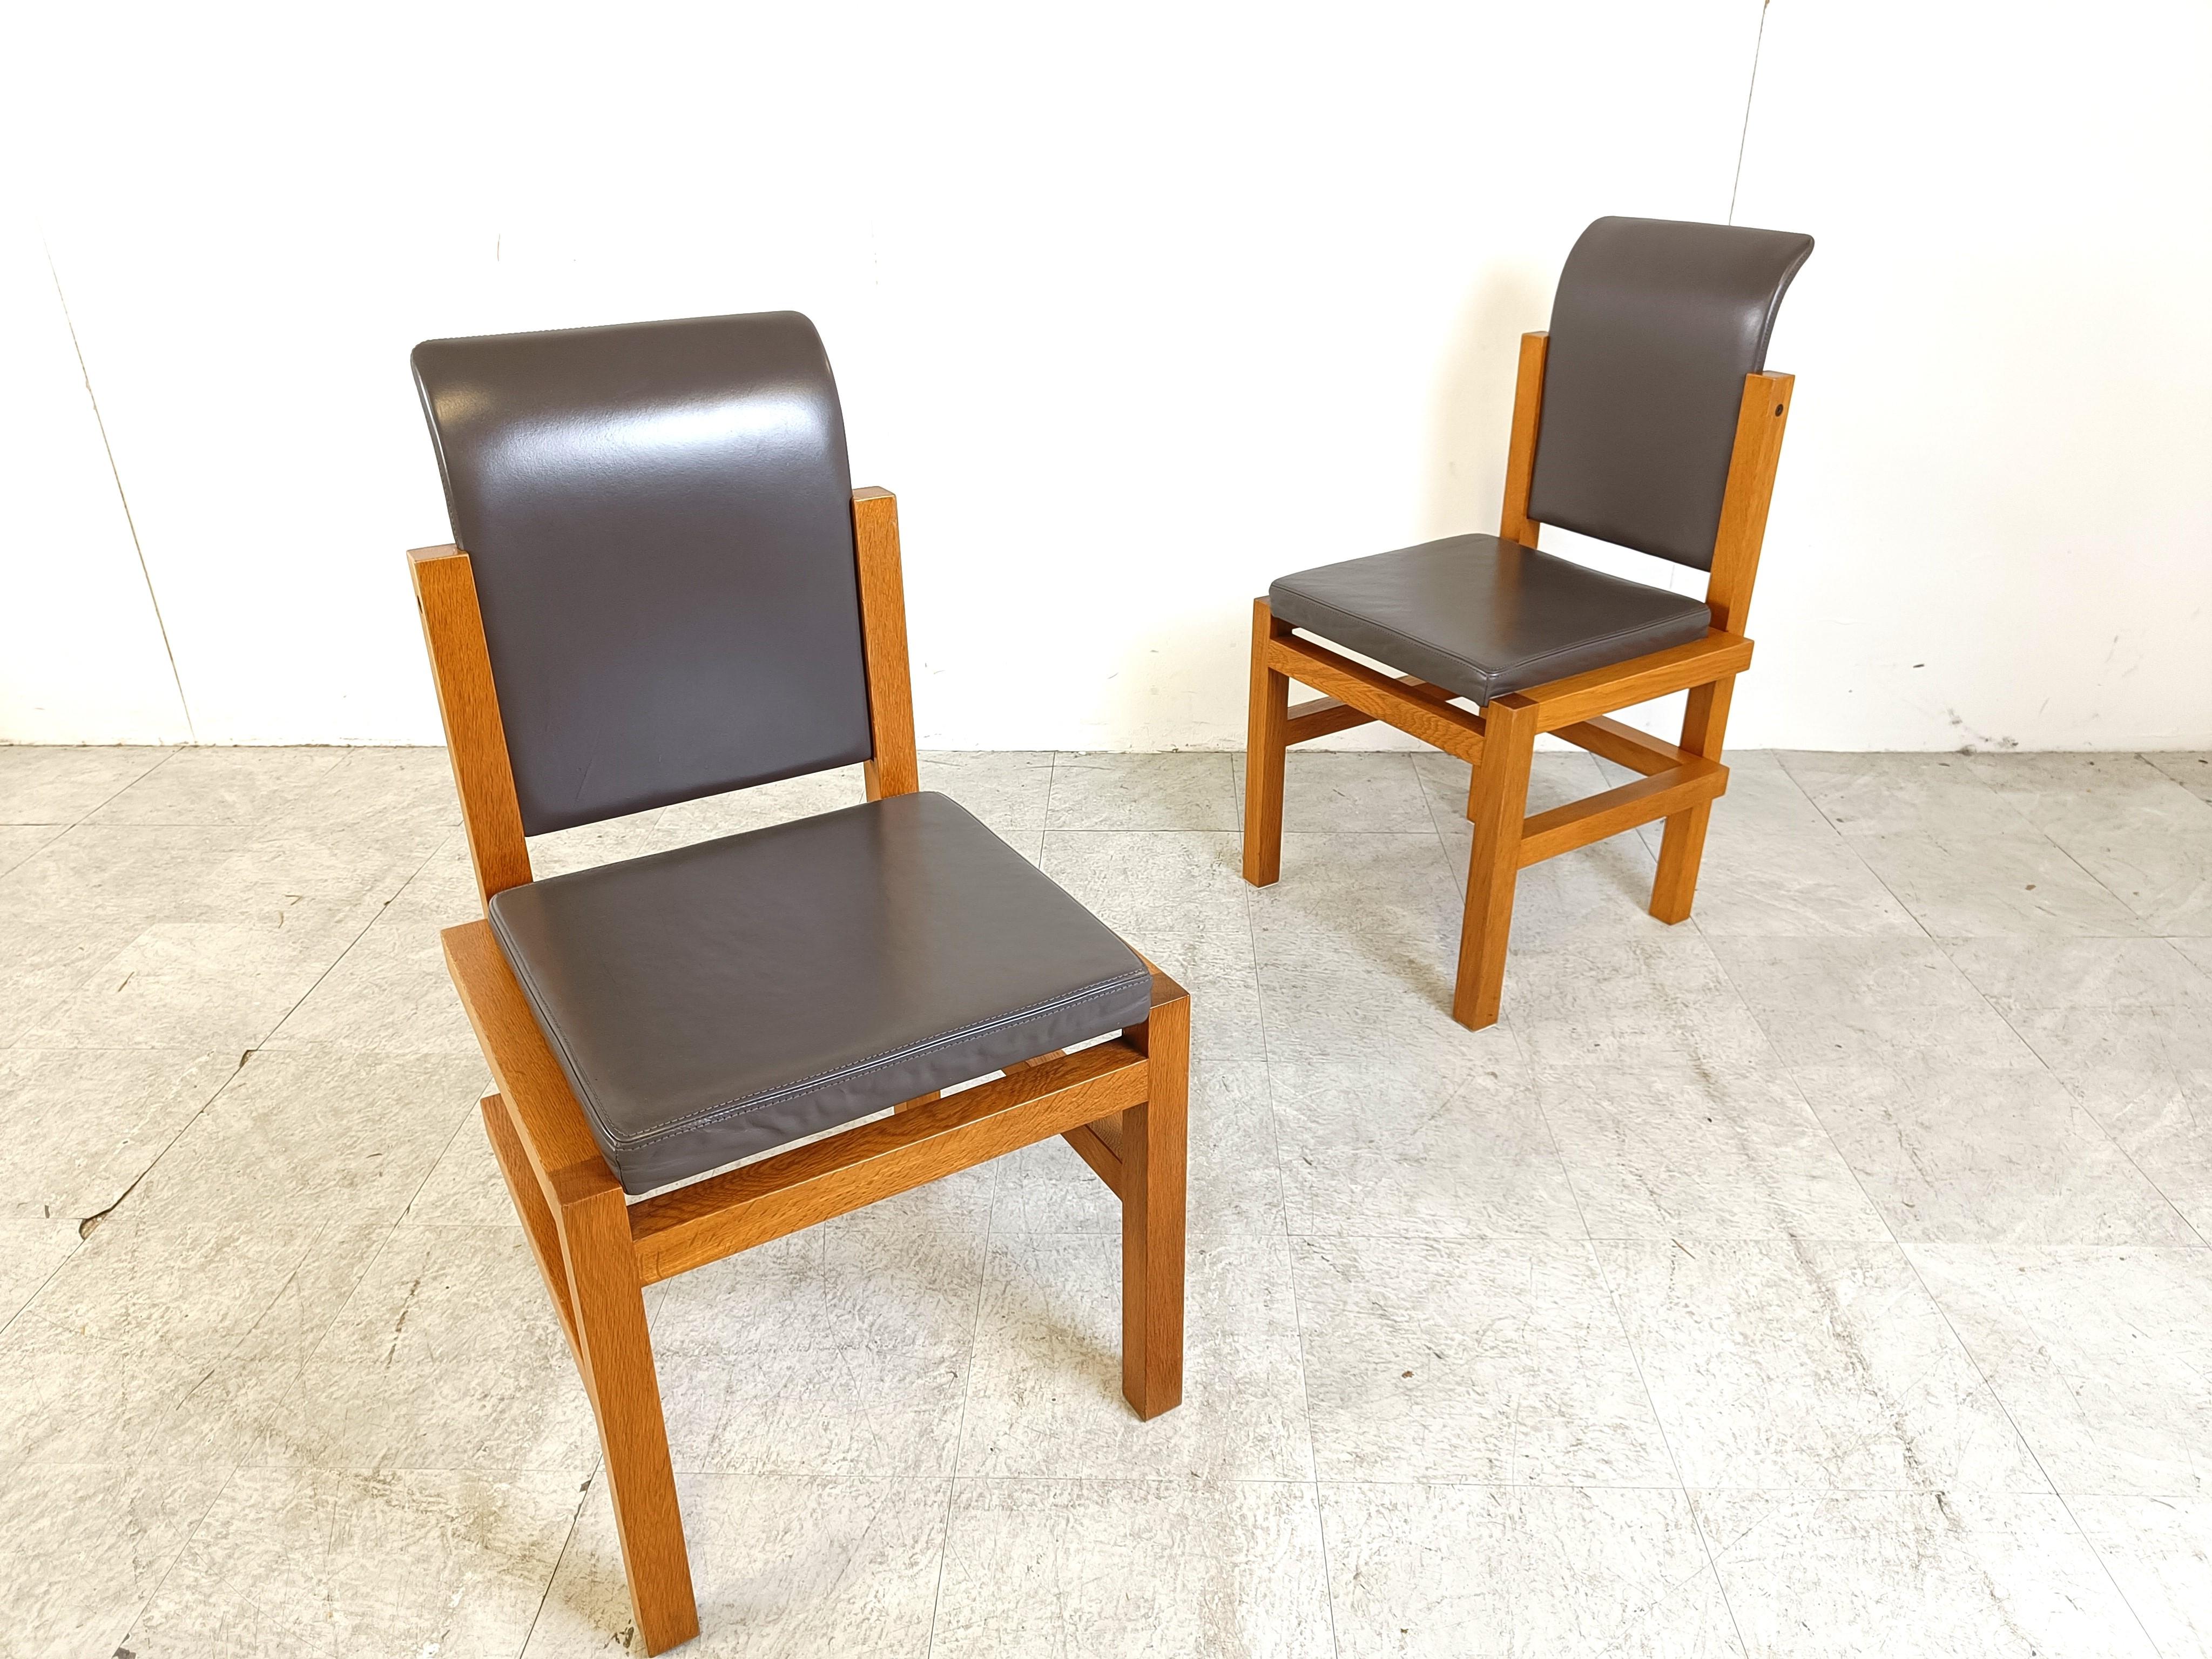 Solid oak dining chairs by Meubelatelier Vanda, 1970s For Sale 2